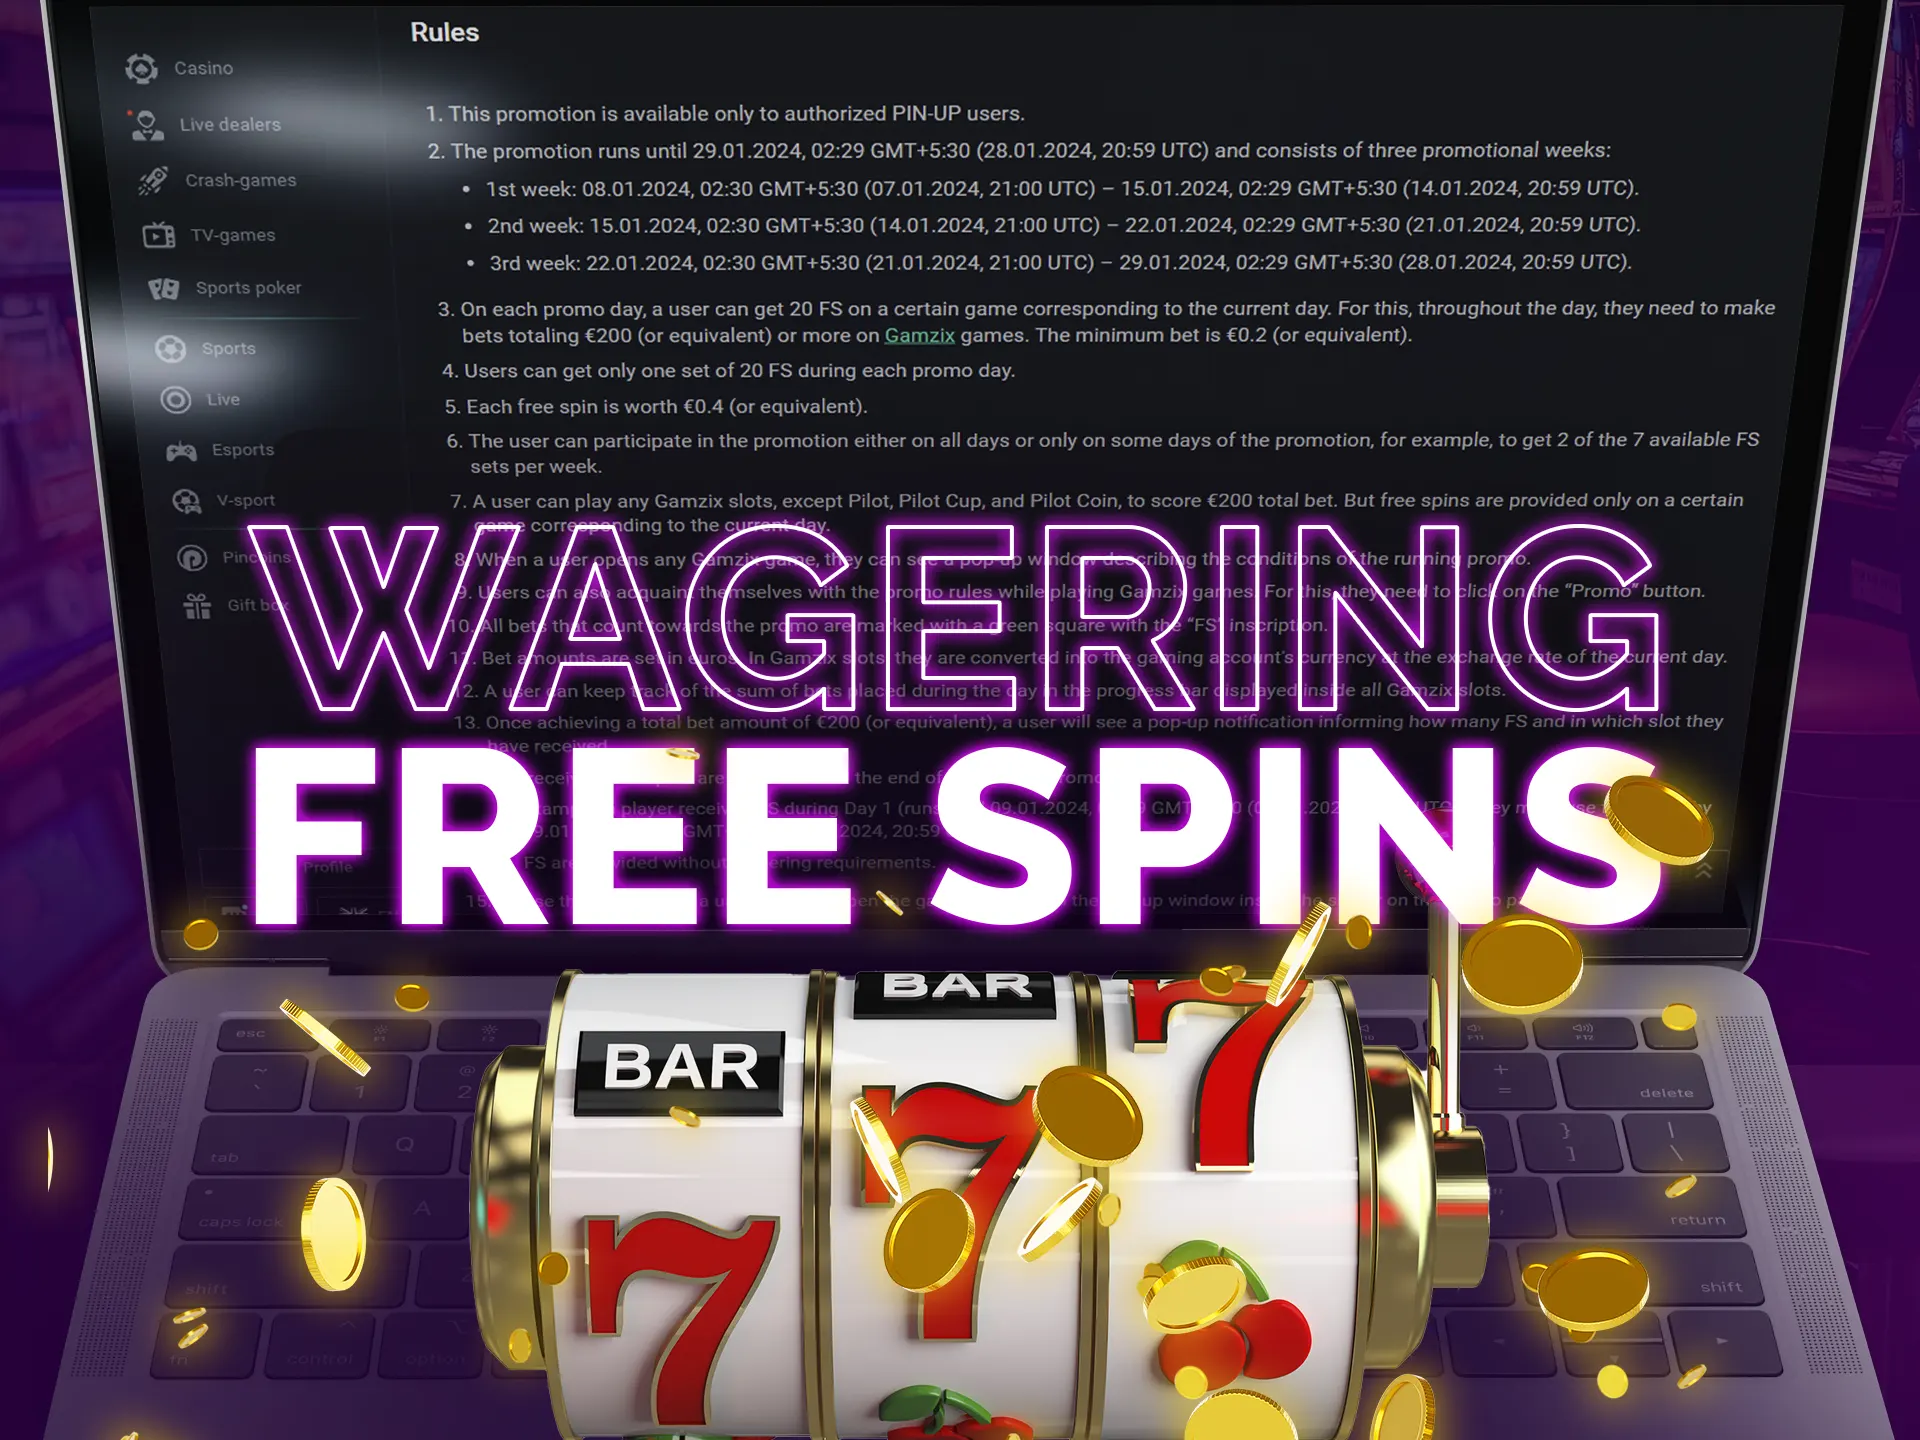 Wagering free spins involves betting on winnings, not the deposit.